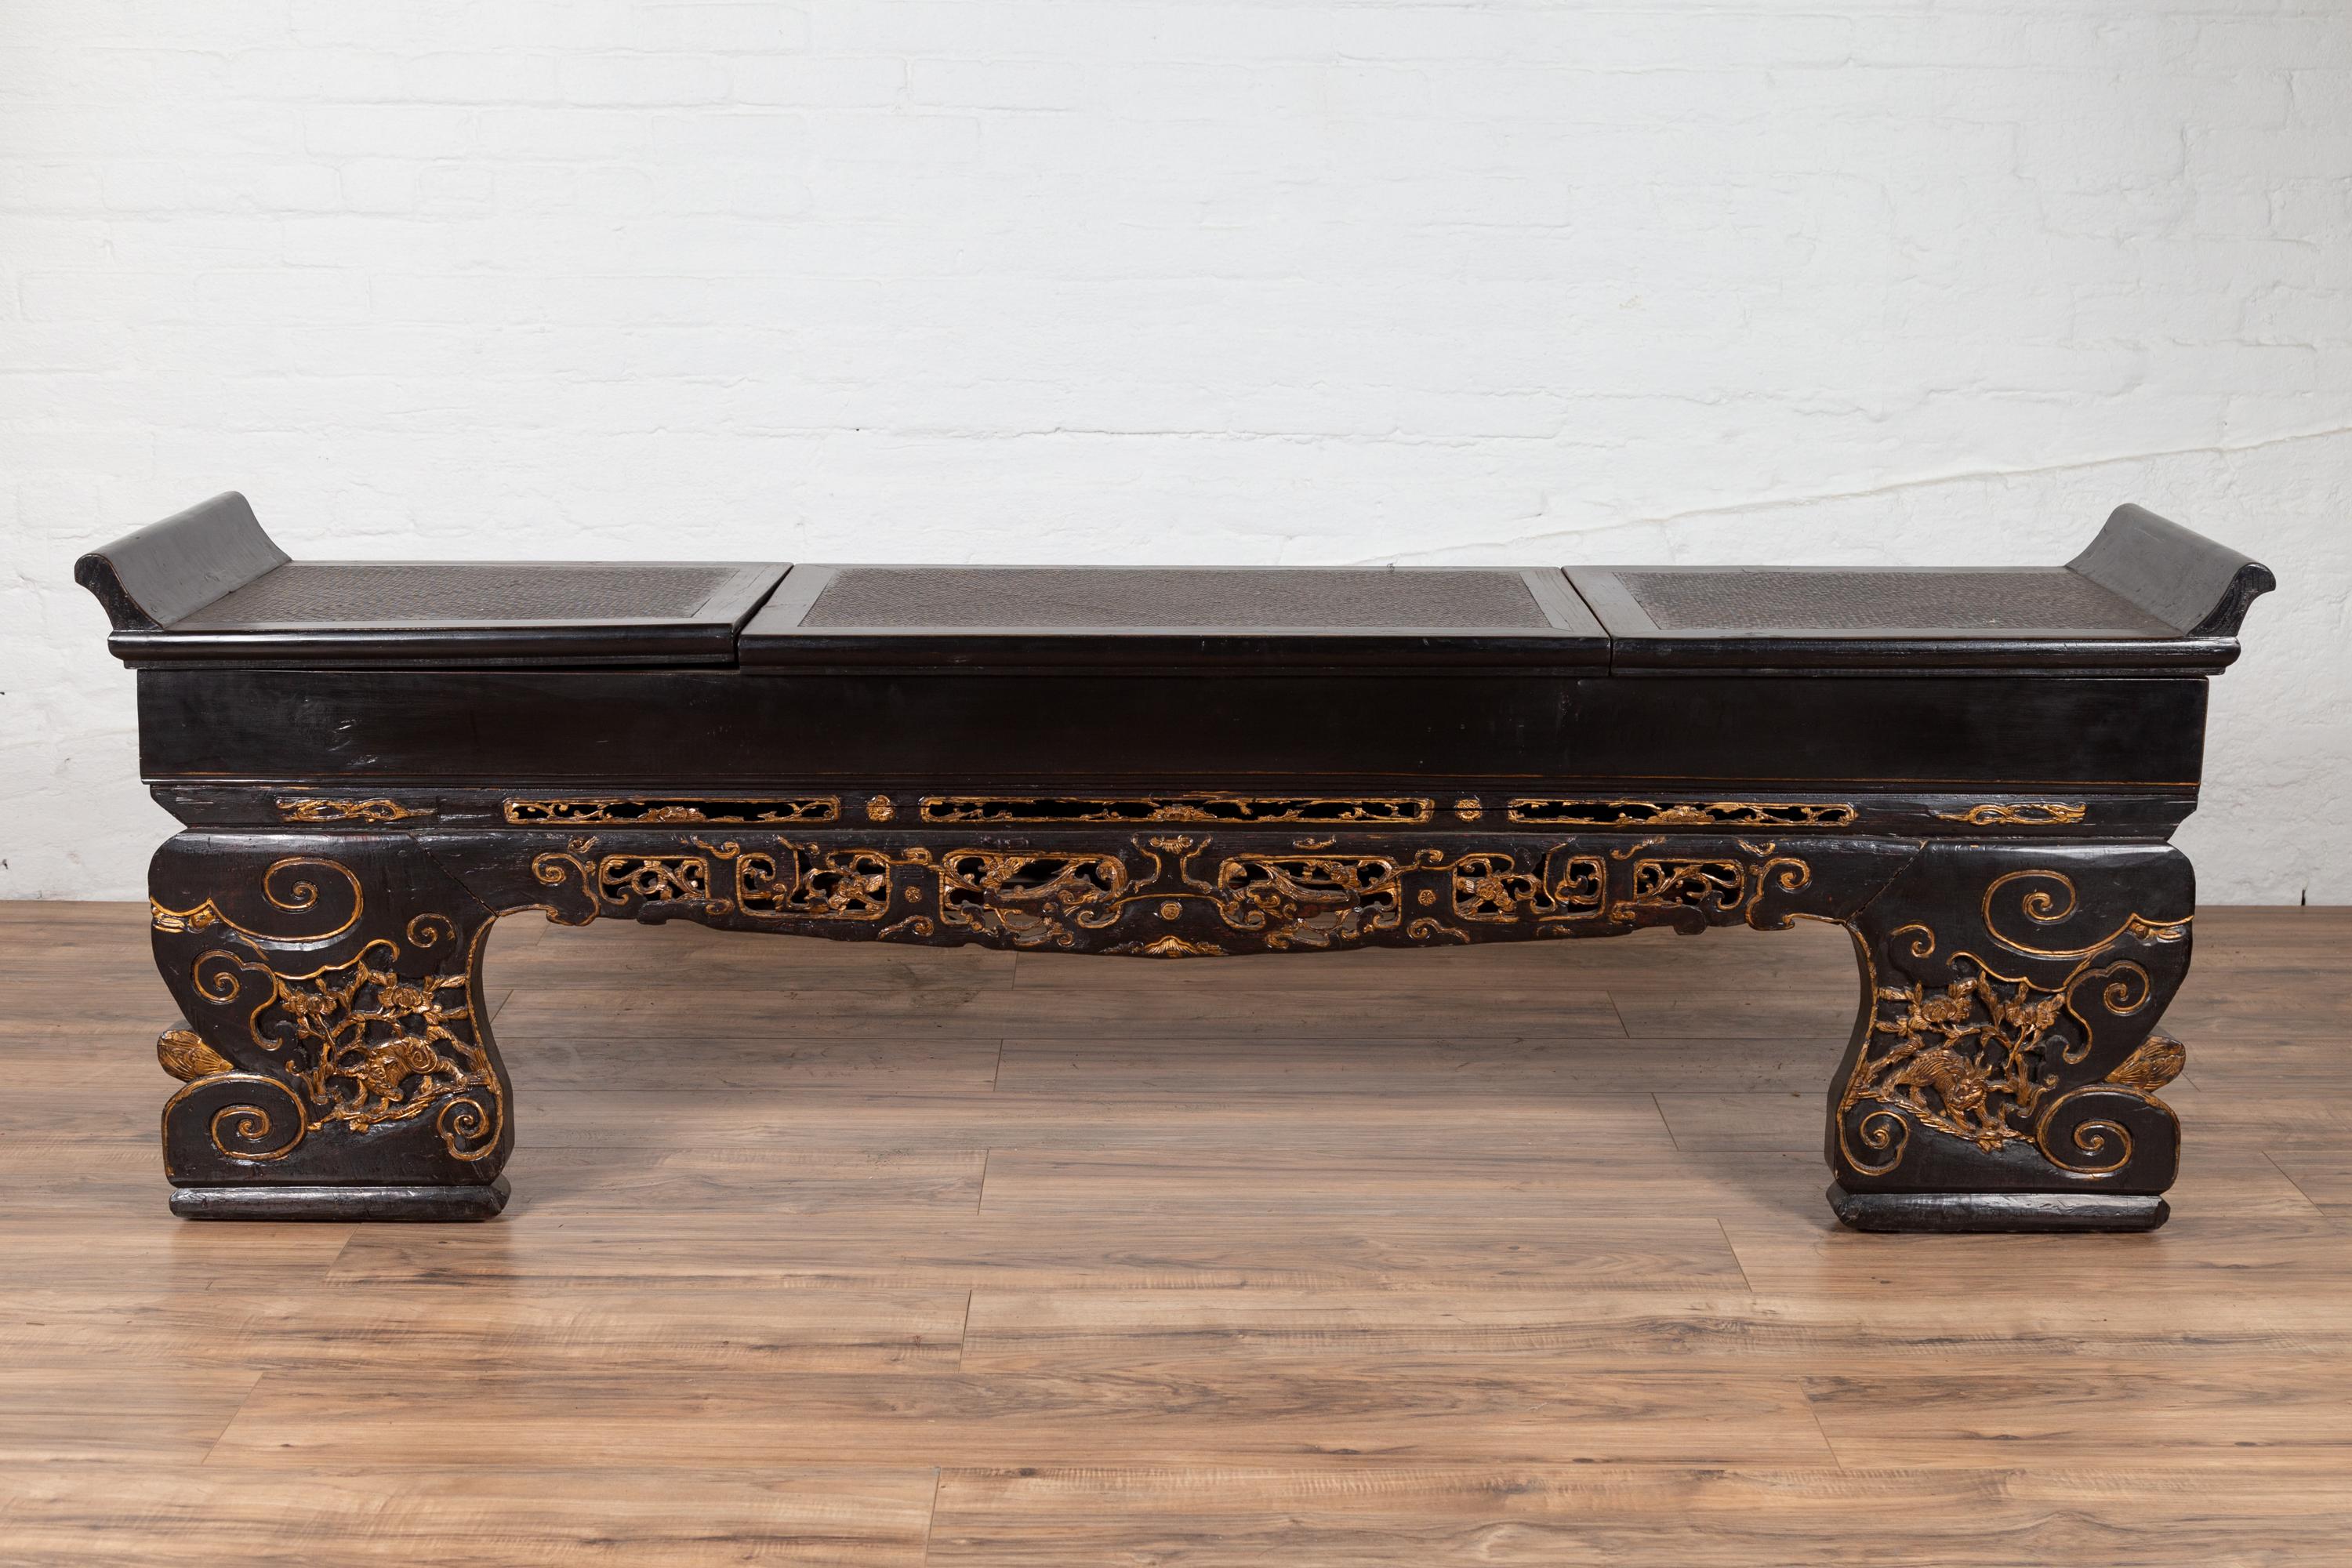 An antique Chinese low console table from the early 20th century with black lacquer finish gilded accents, hidden storage and everted flanges, perfect to be used as a bench. We currently have two pieces available, priced and sold individually. Born